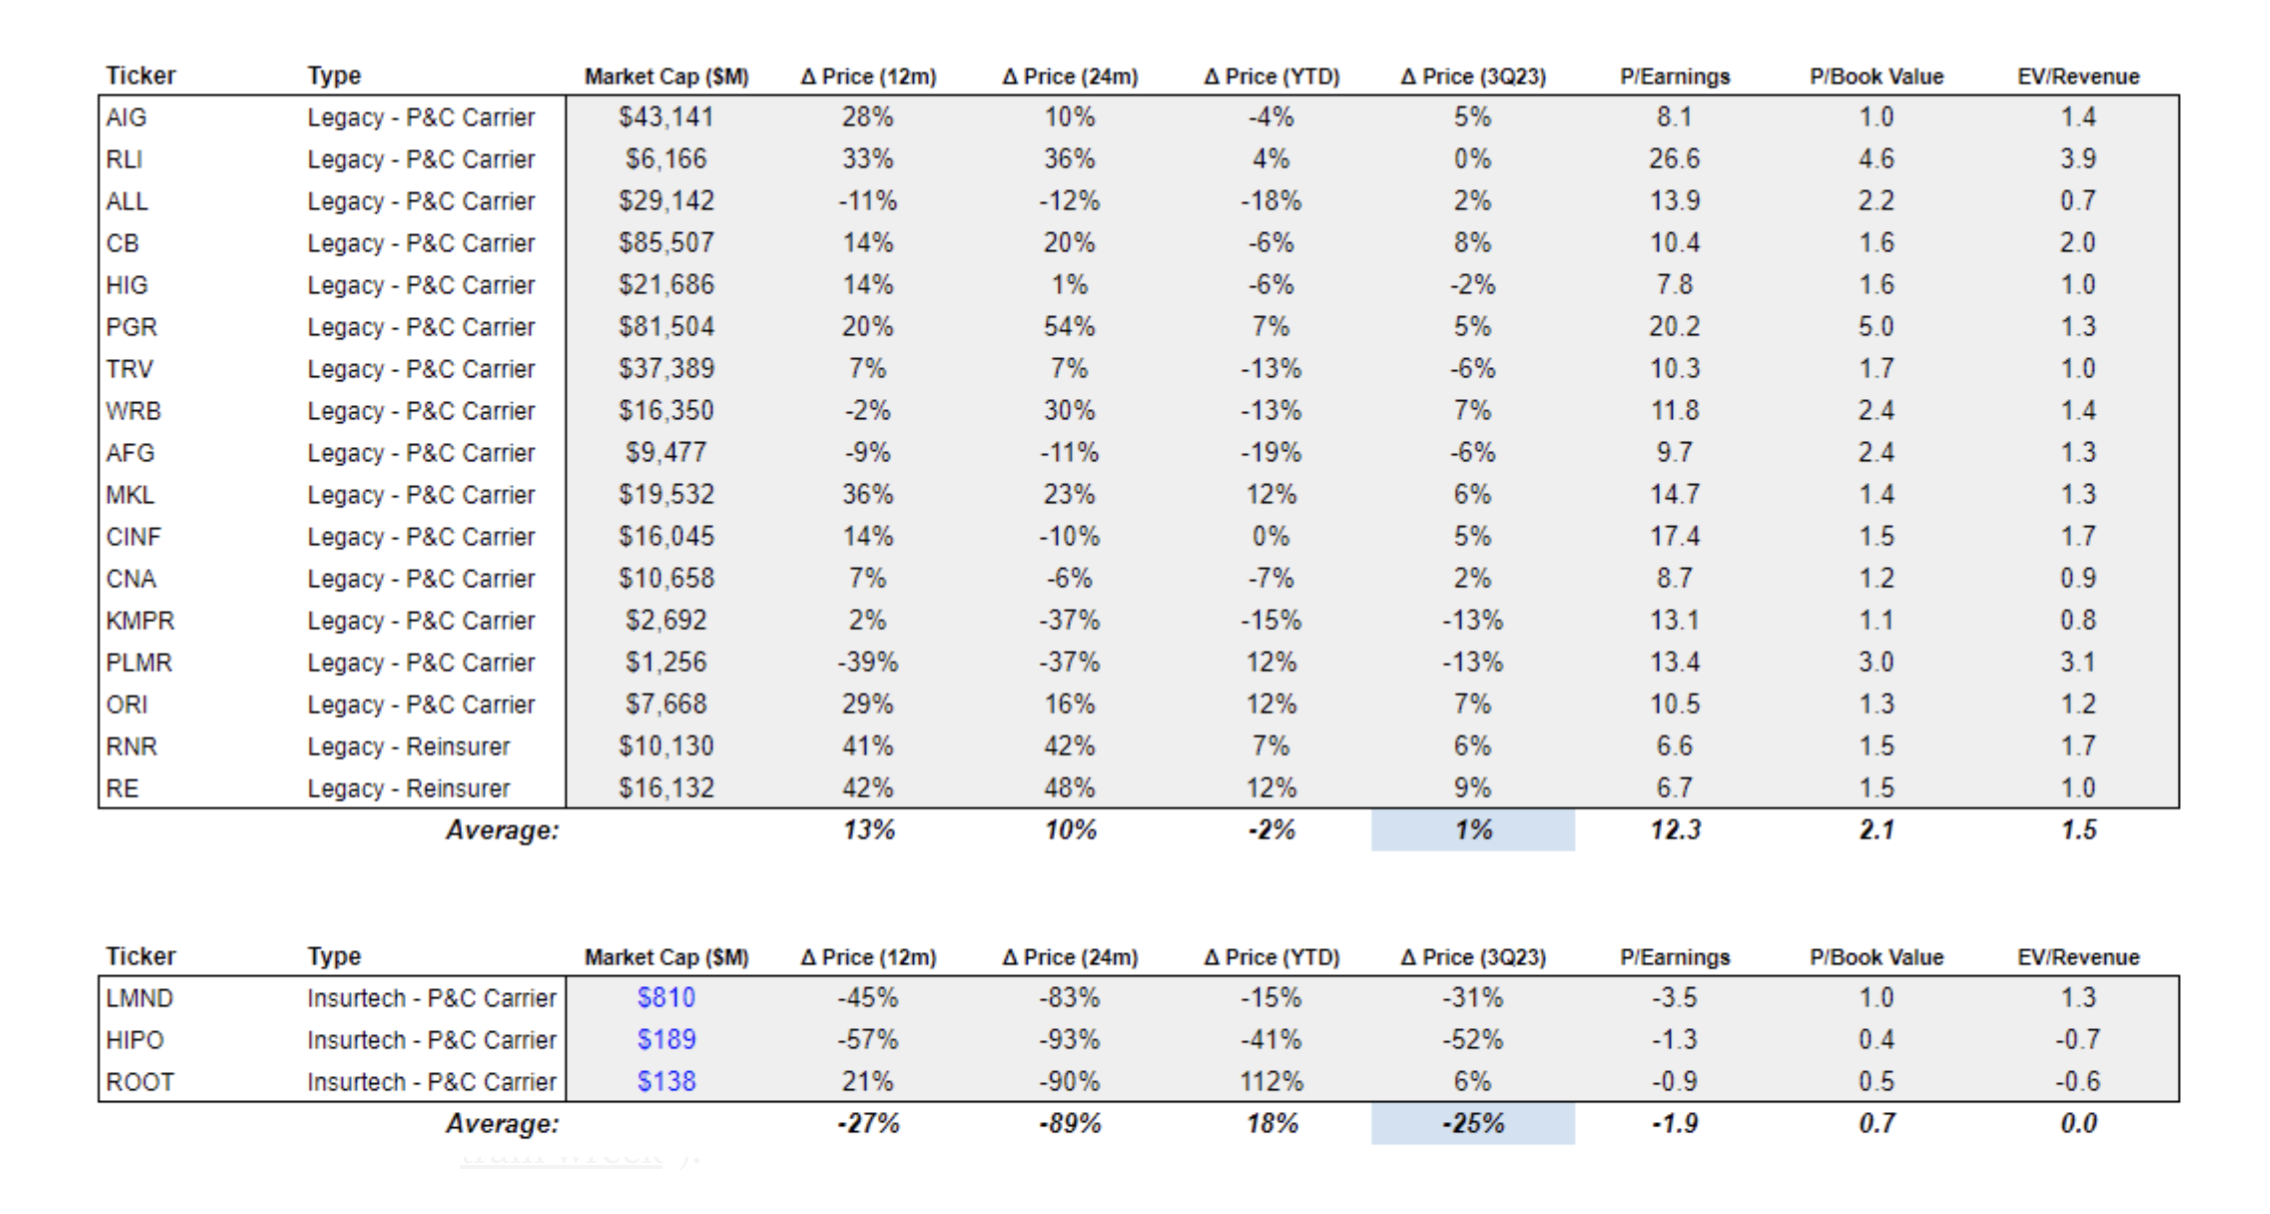 Source: Bloomberg Financial as of 9/29/2023; Earnings and Revenue are based on forward estimates.